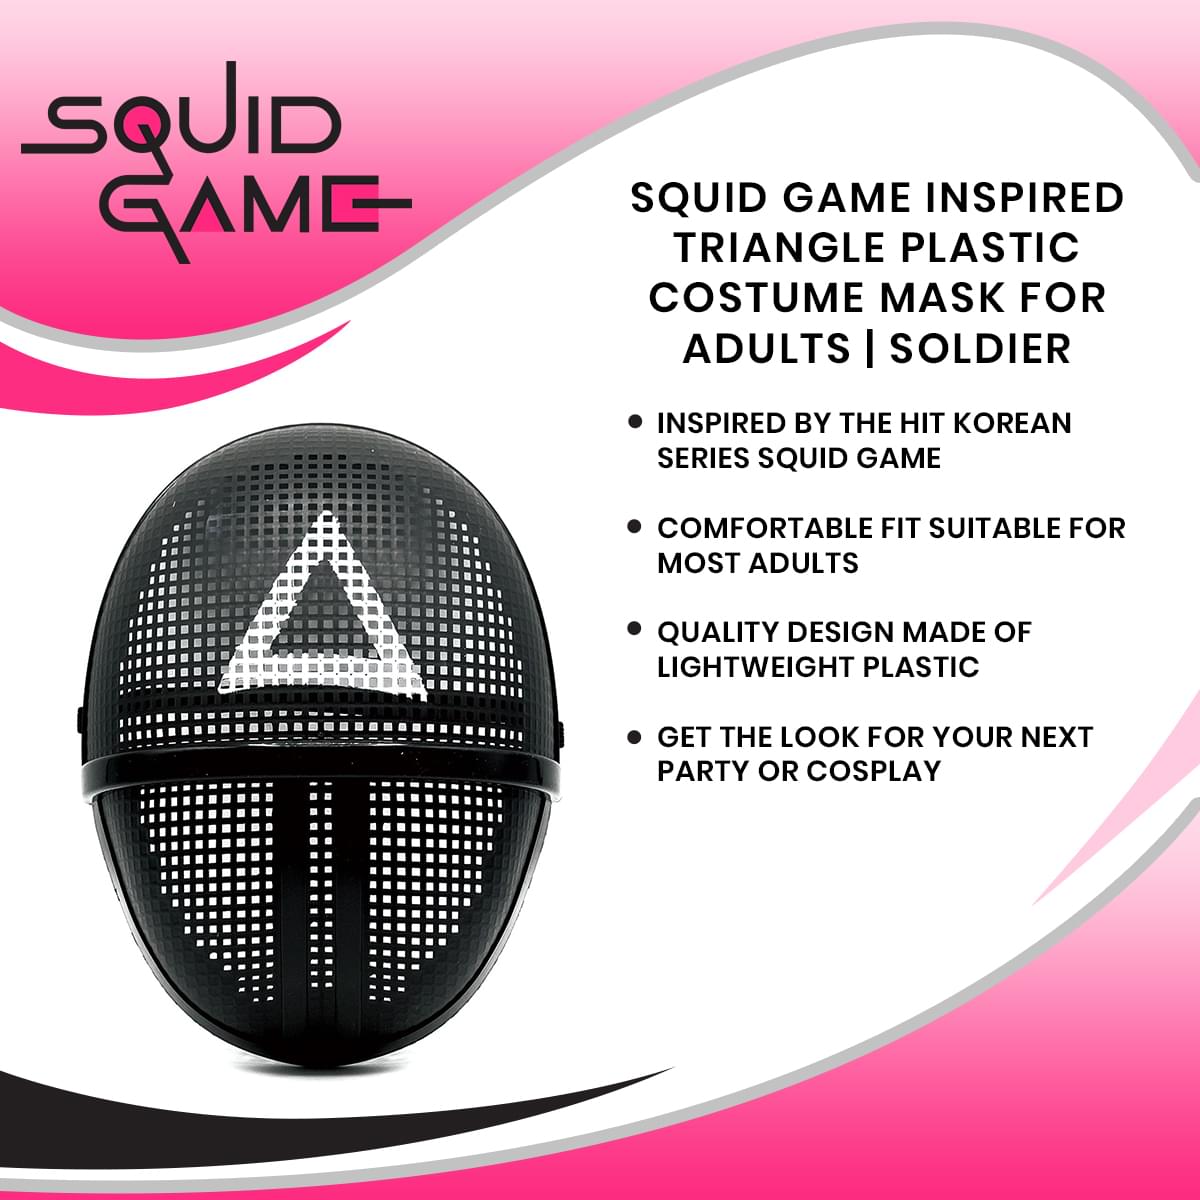 Squid Game Inspired Triangle Plastic Costume Mask for Adults | Soldier